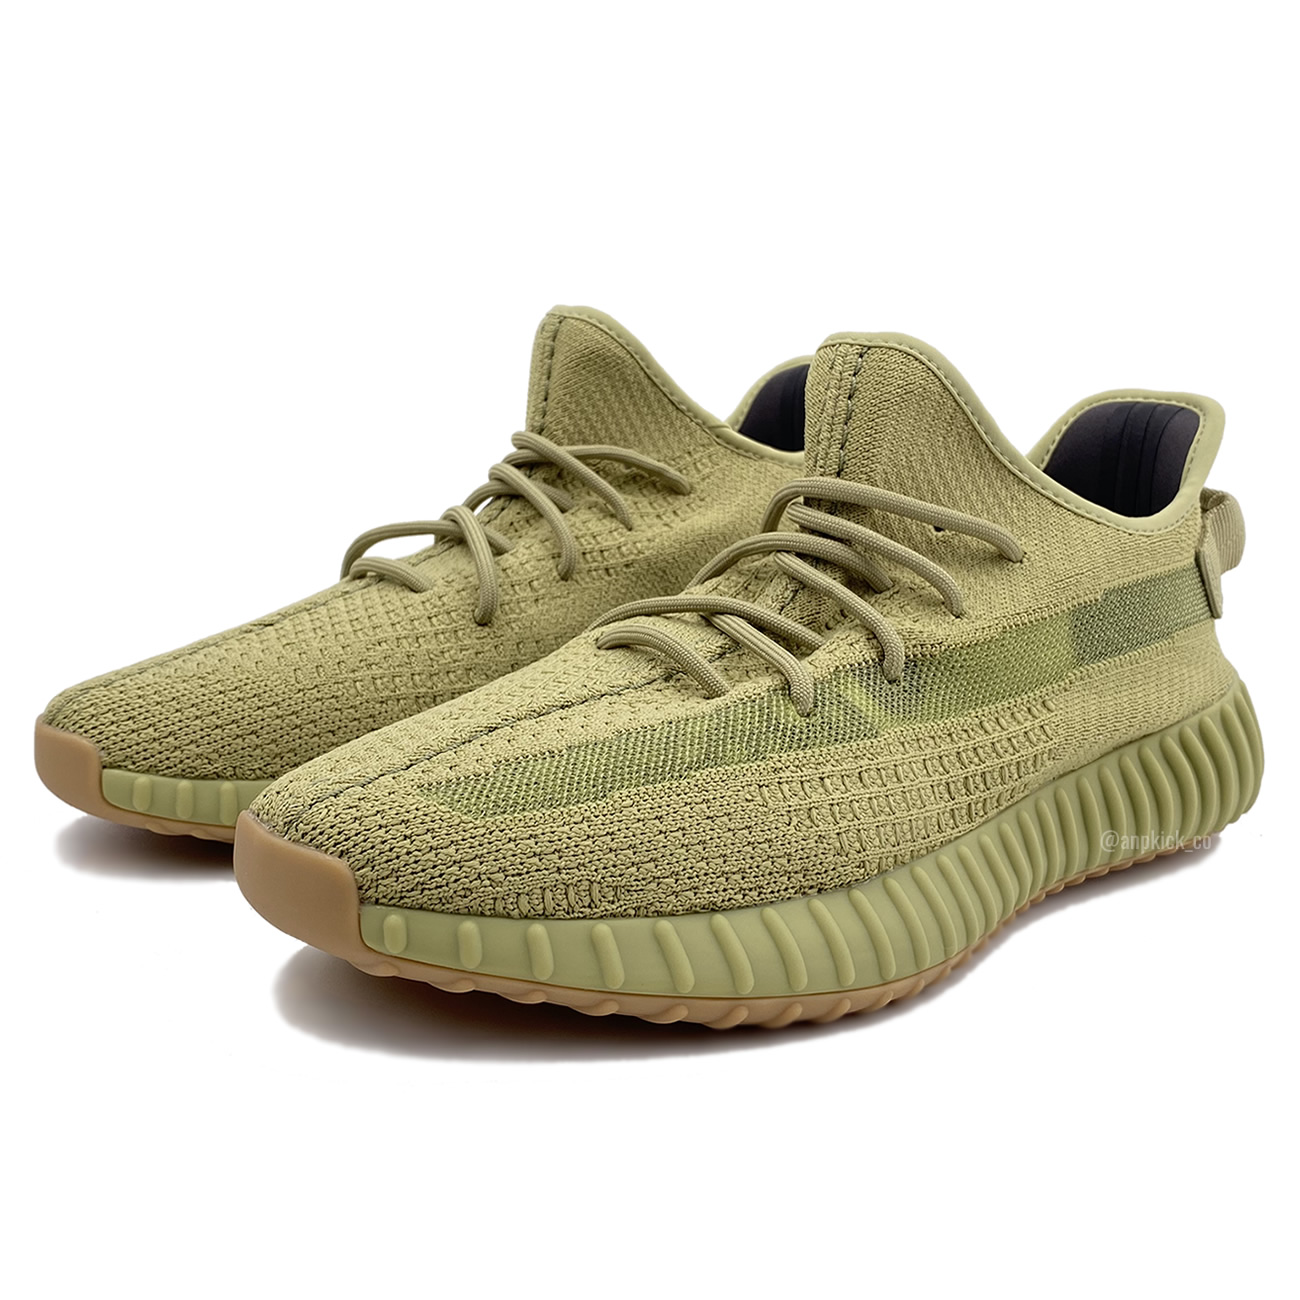 Adidas Yeezy Boost 350 V2 Sulfur Fy5346 First Preview Release Date (3) - newkick.org